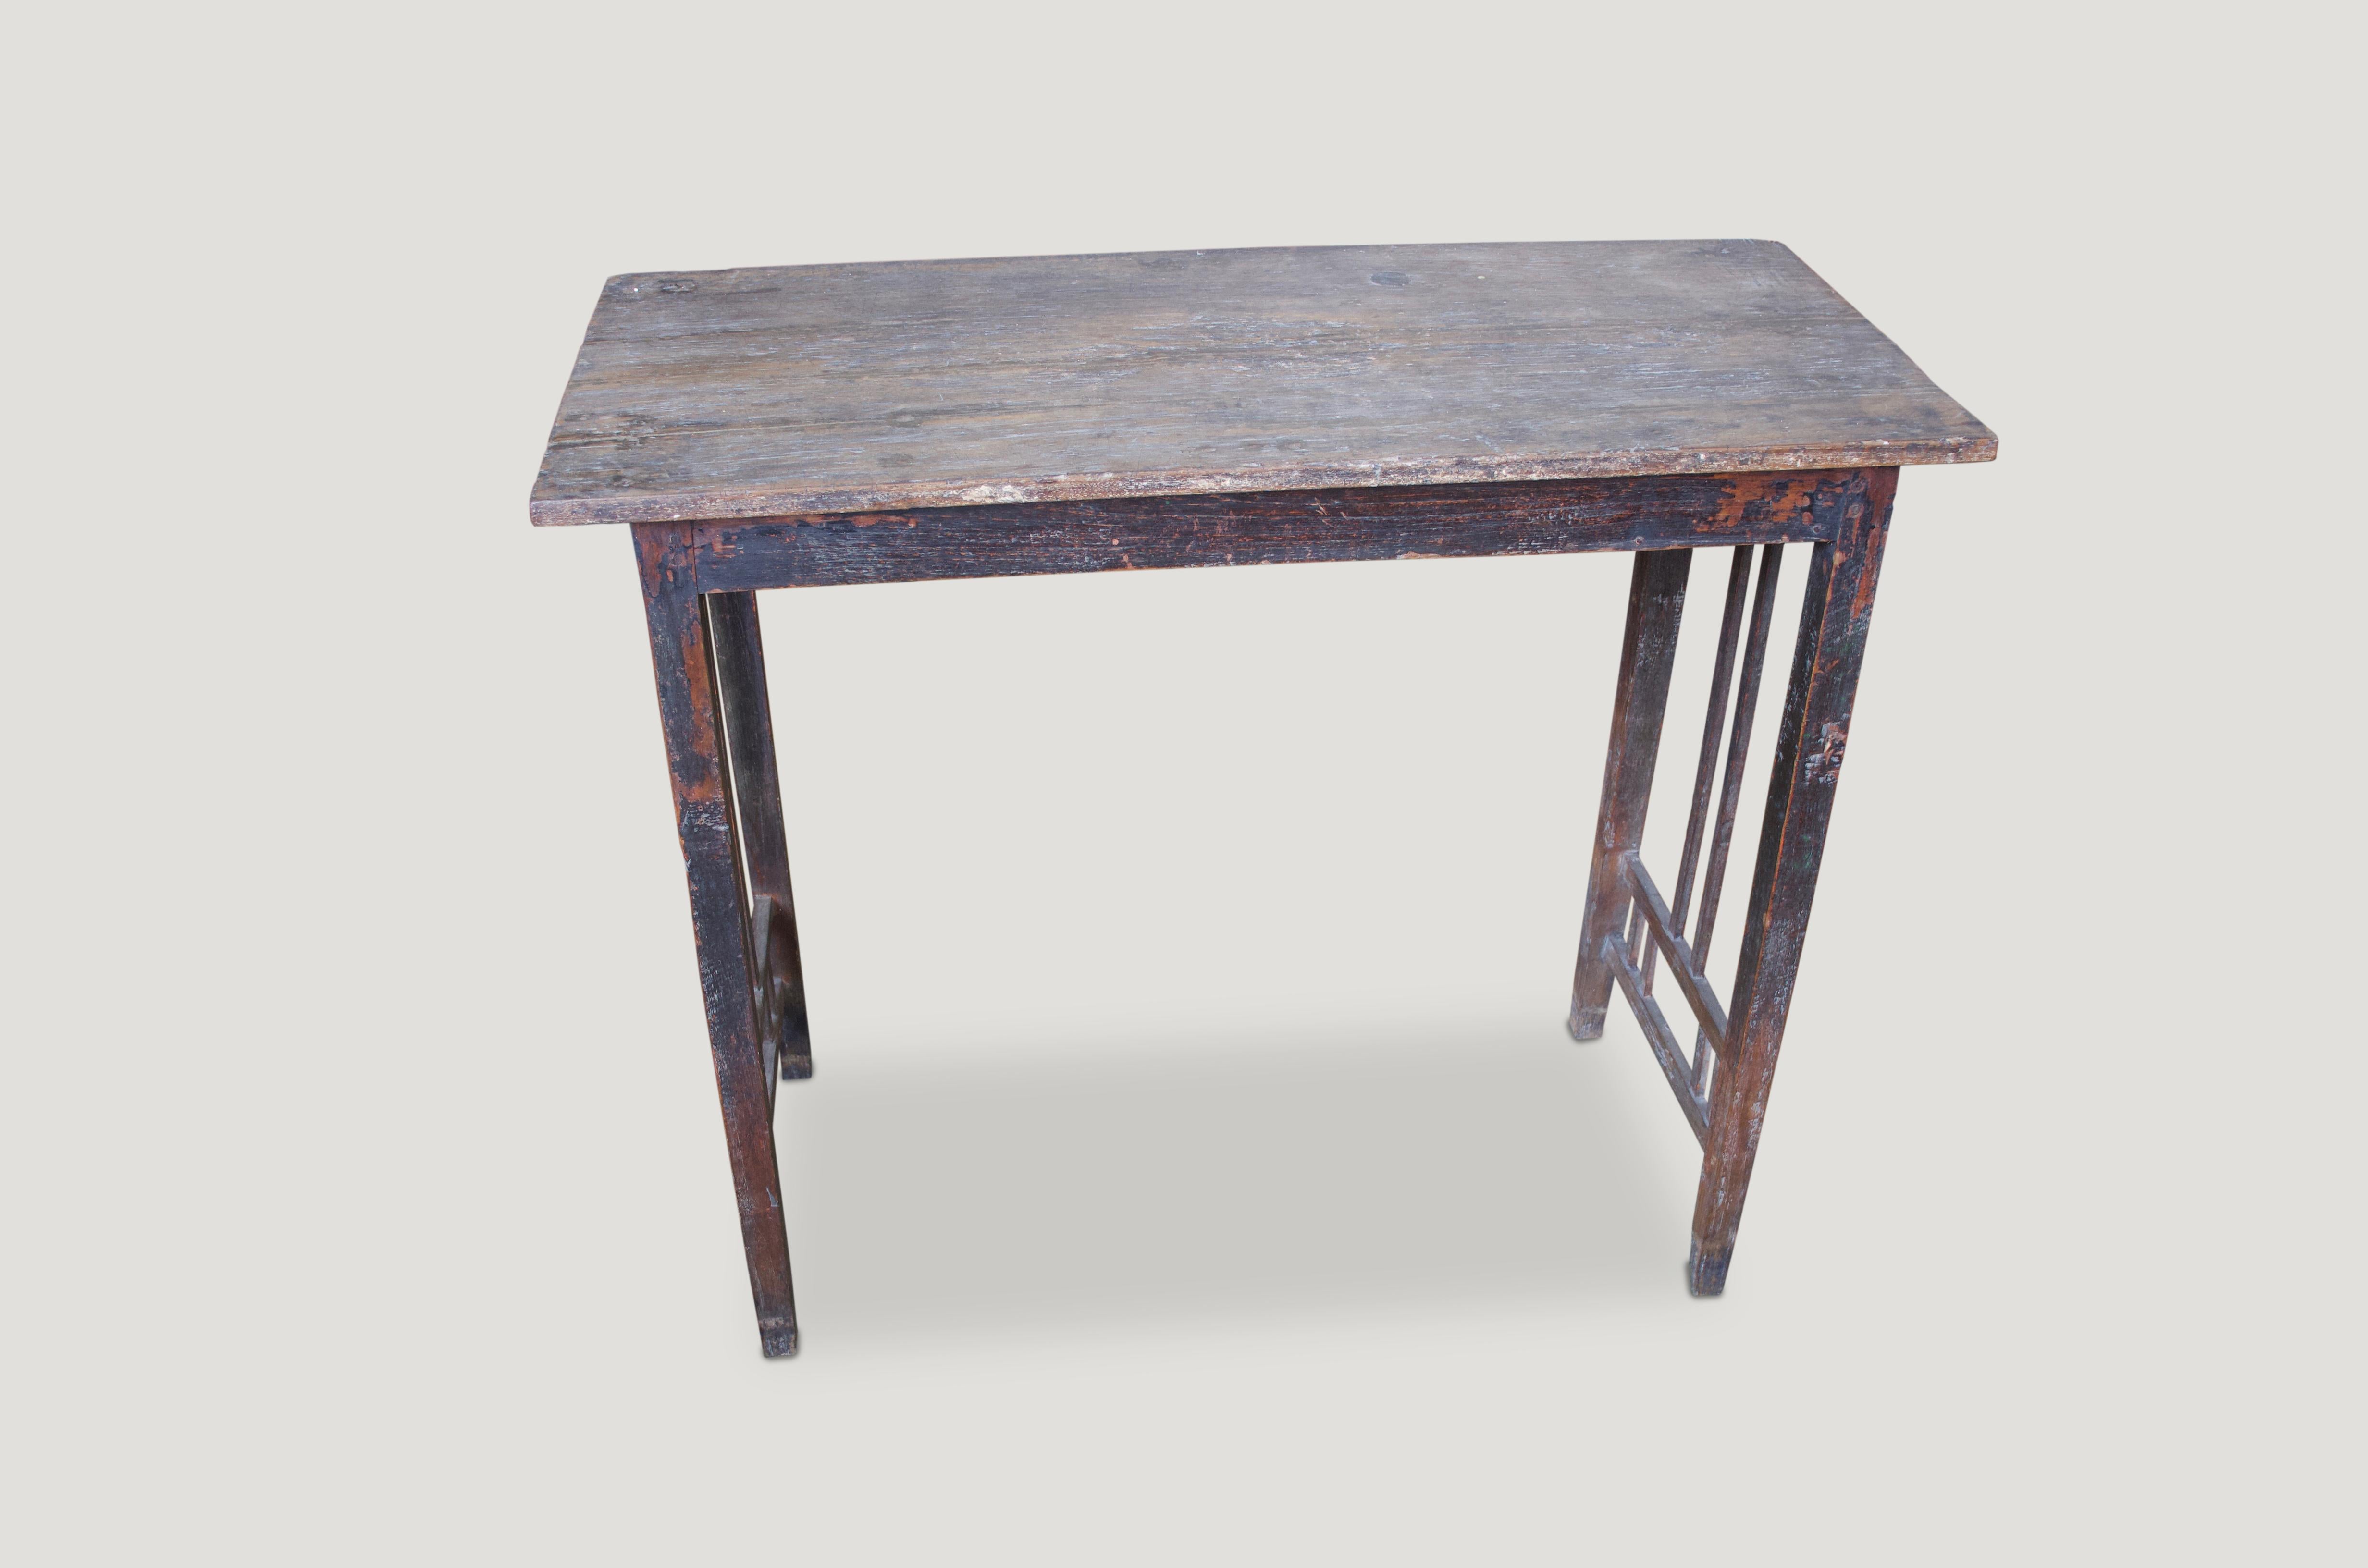 Antique wabi-sabi teak console table with lovely patina and finely cut legs.

This console was sourced in the spirit of wabi-sabi, a Japanese philosophy that beauty can be found in imperfection and impermanence. It’s a beauty of things modest and